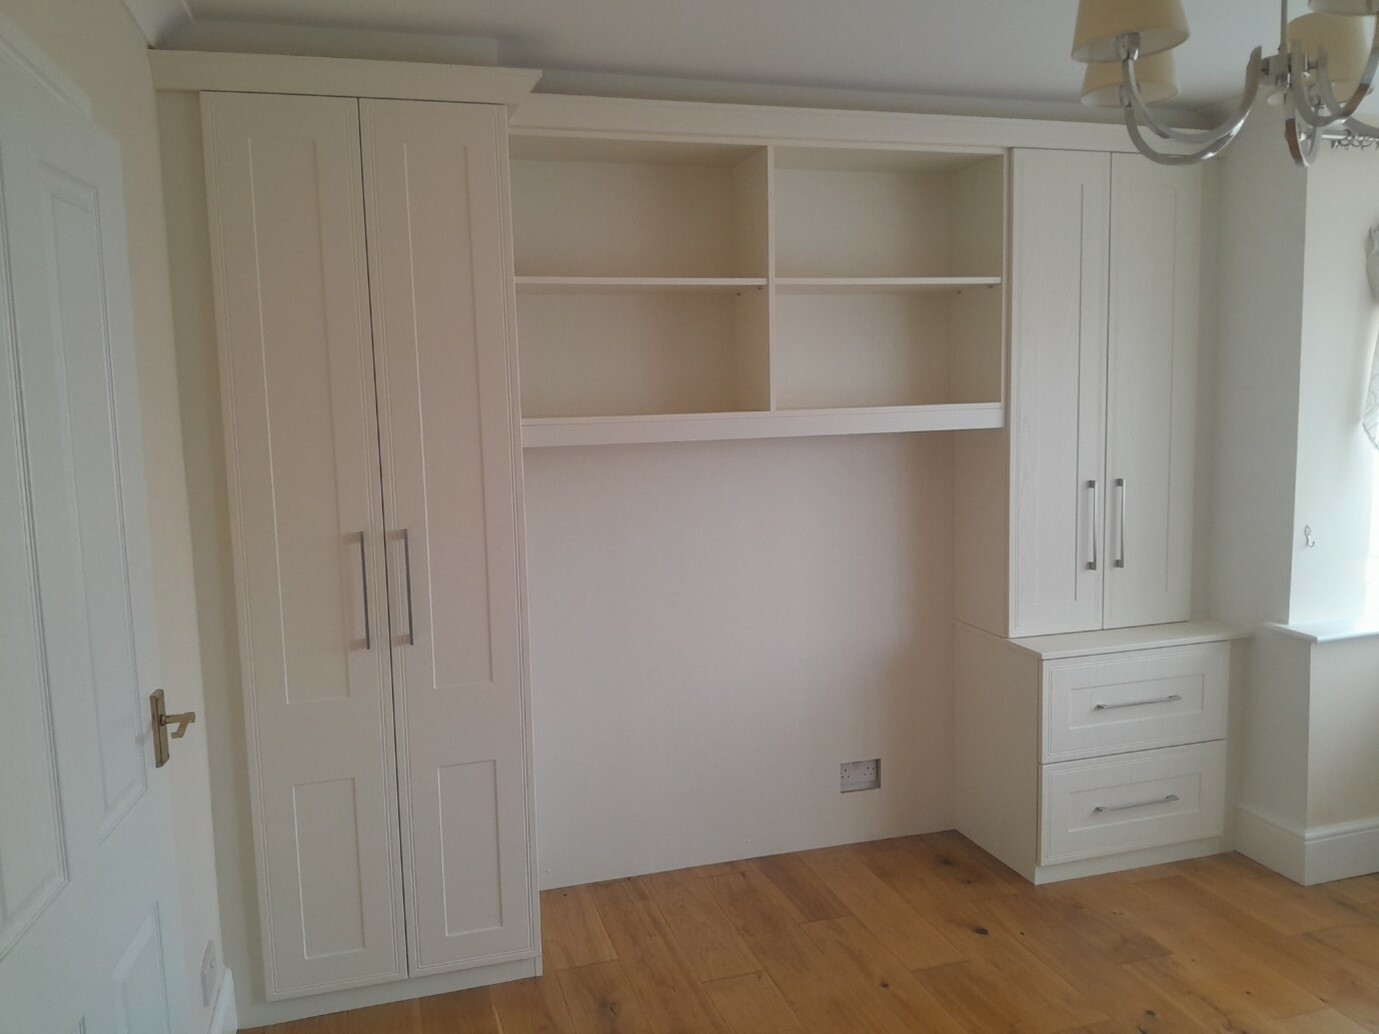 Bespoke fitted furniture and spare room storage